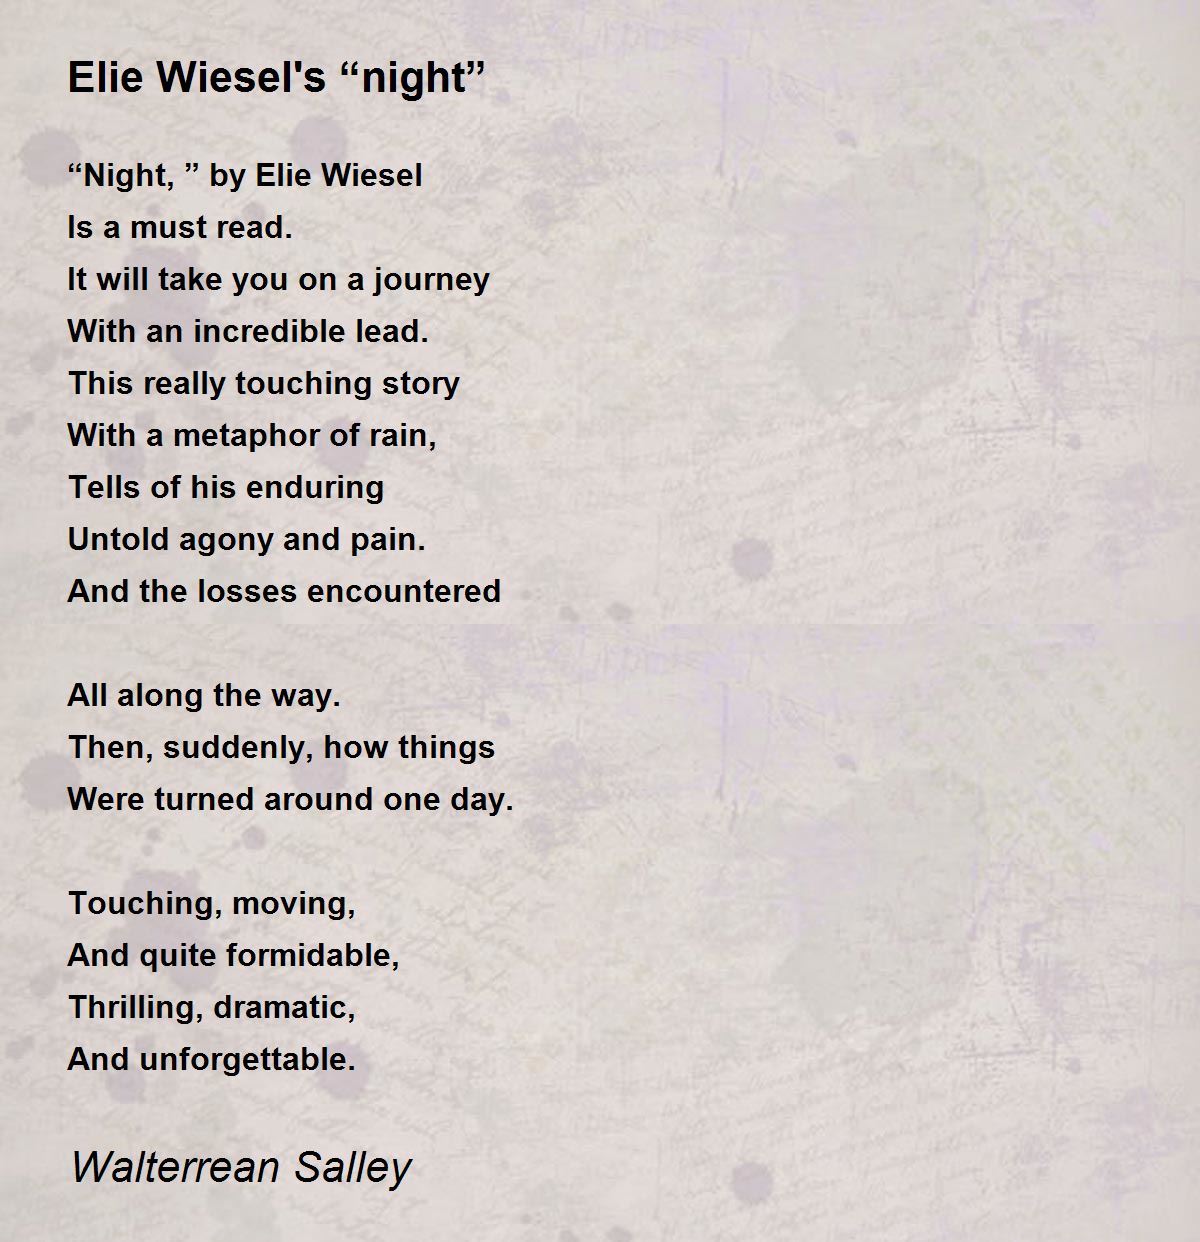 essay about the book night by elie wiesel